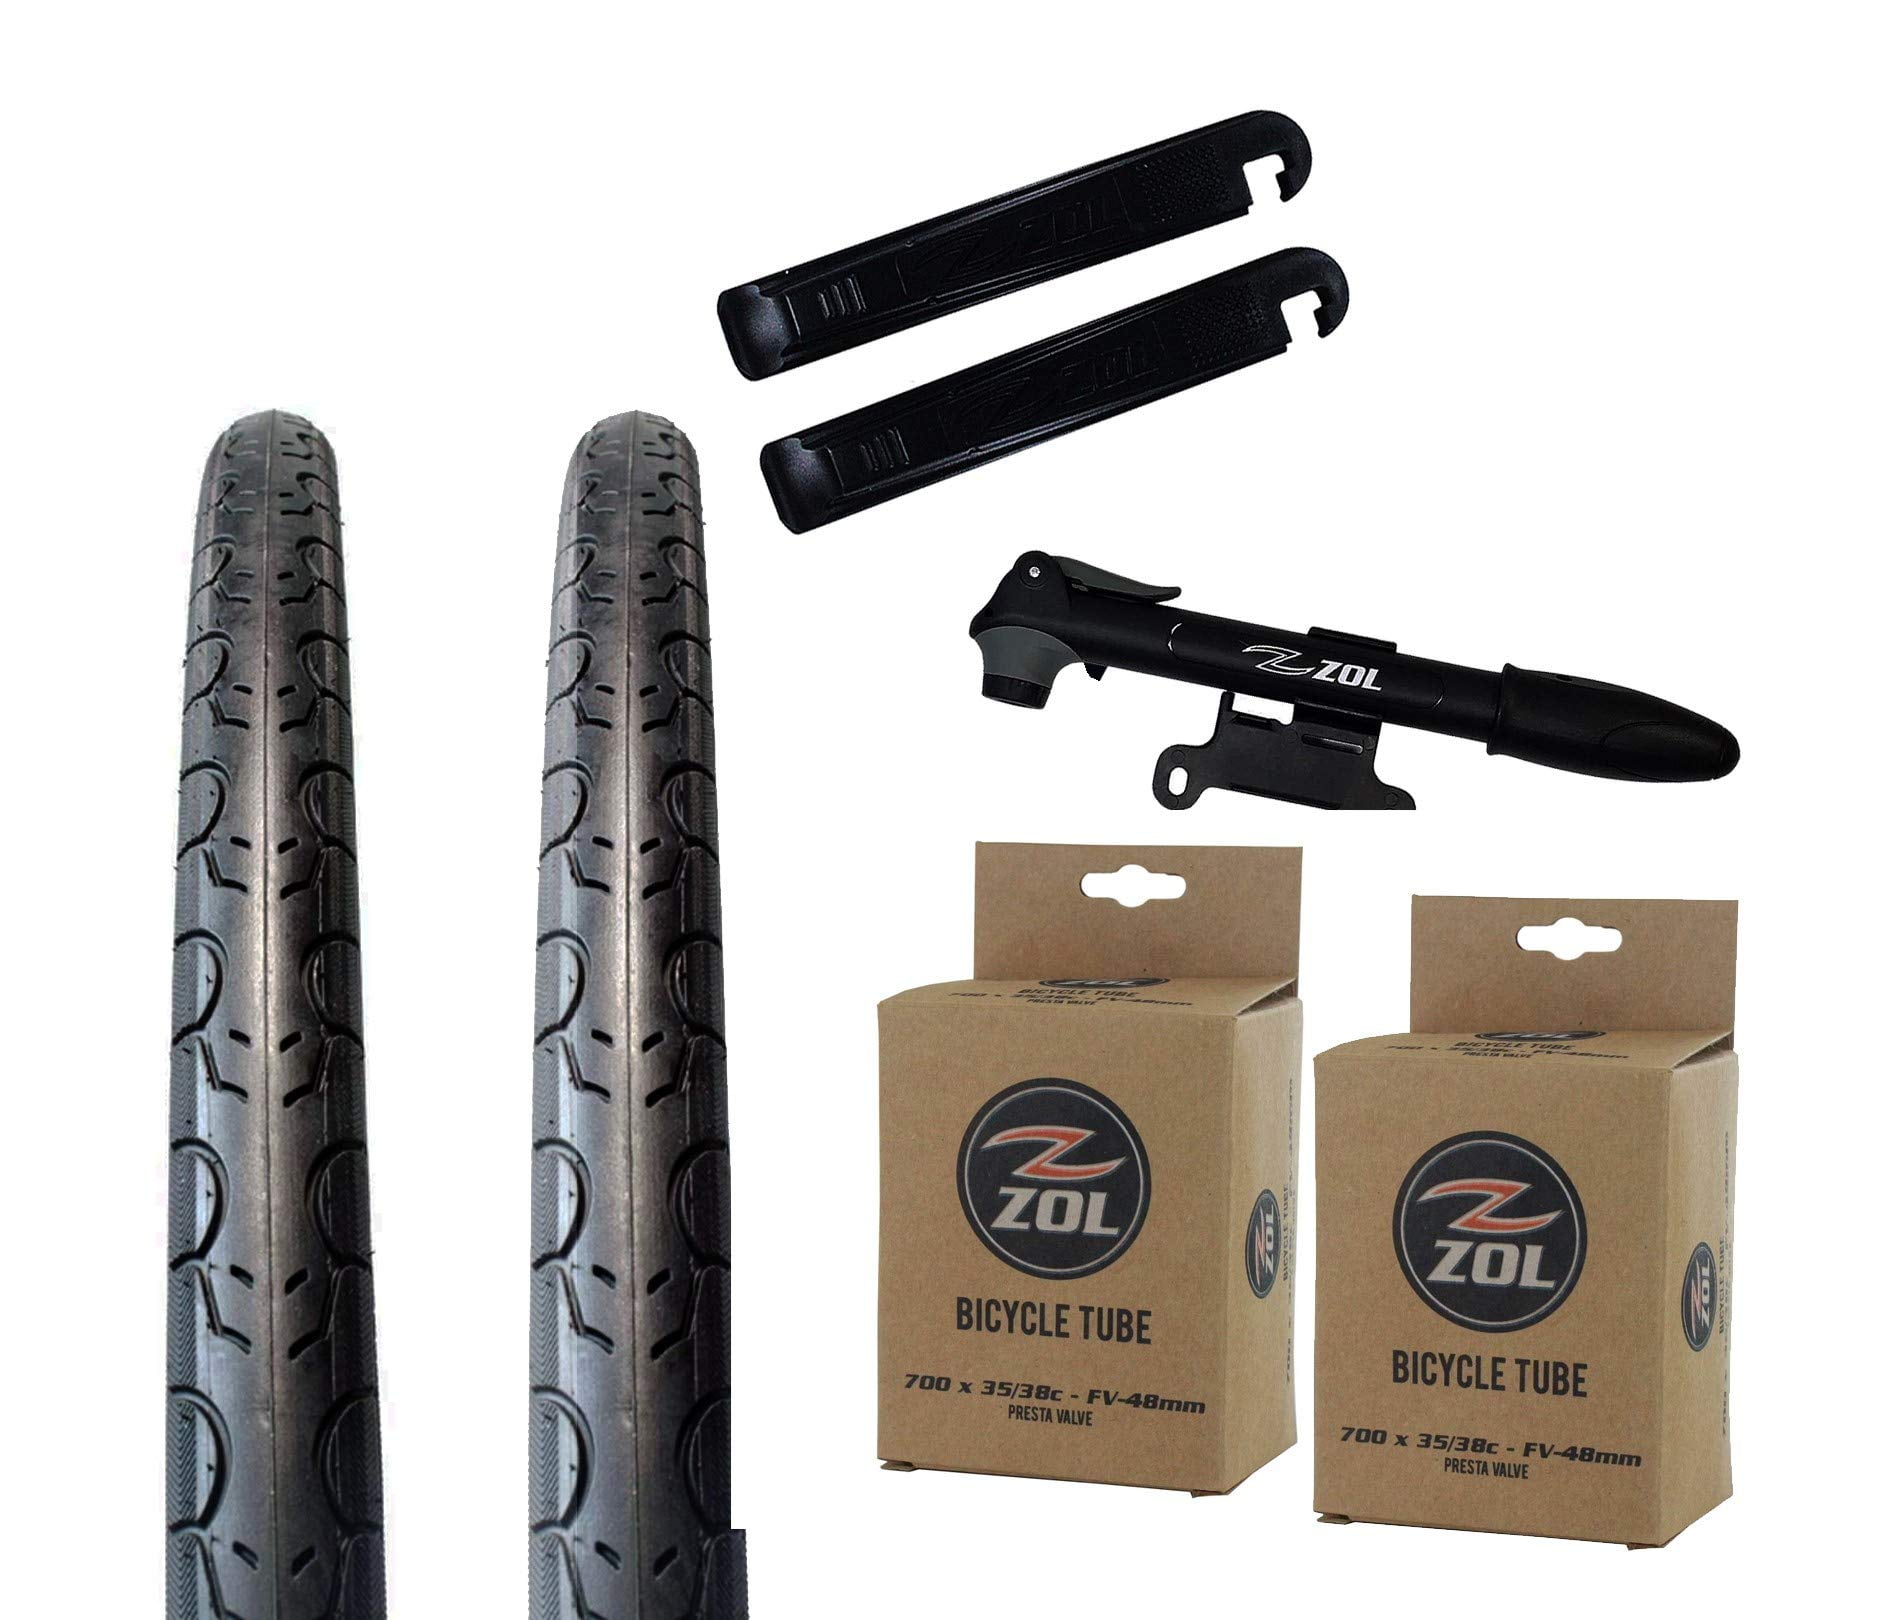 Zol Bundle 2 Pack G5013 Road Tires and Tube 700x28C Presta/French 48 MM Valve 